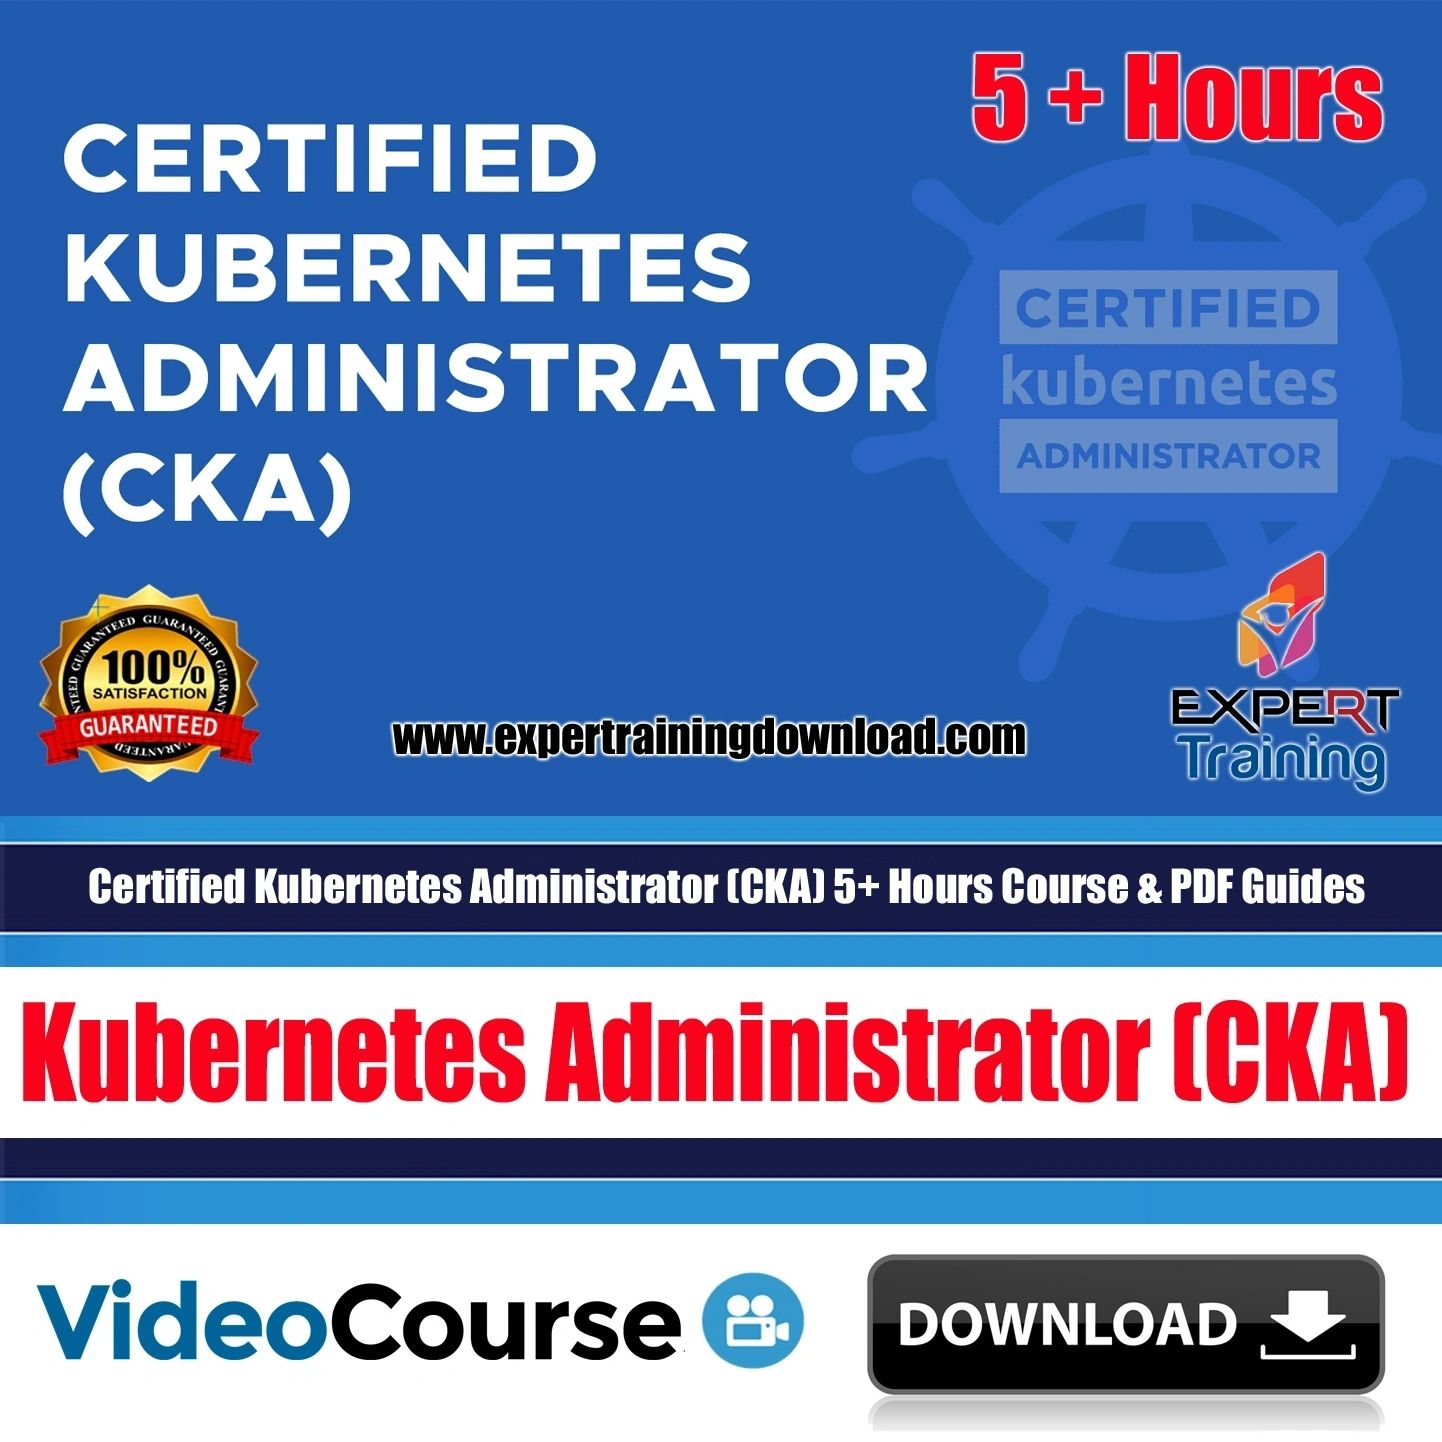 Certified Kubernetes Administrator (CKA) 5+ Hours Course & PDF Guides